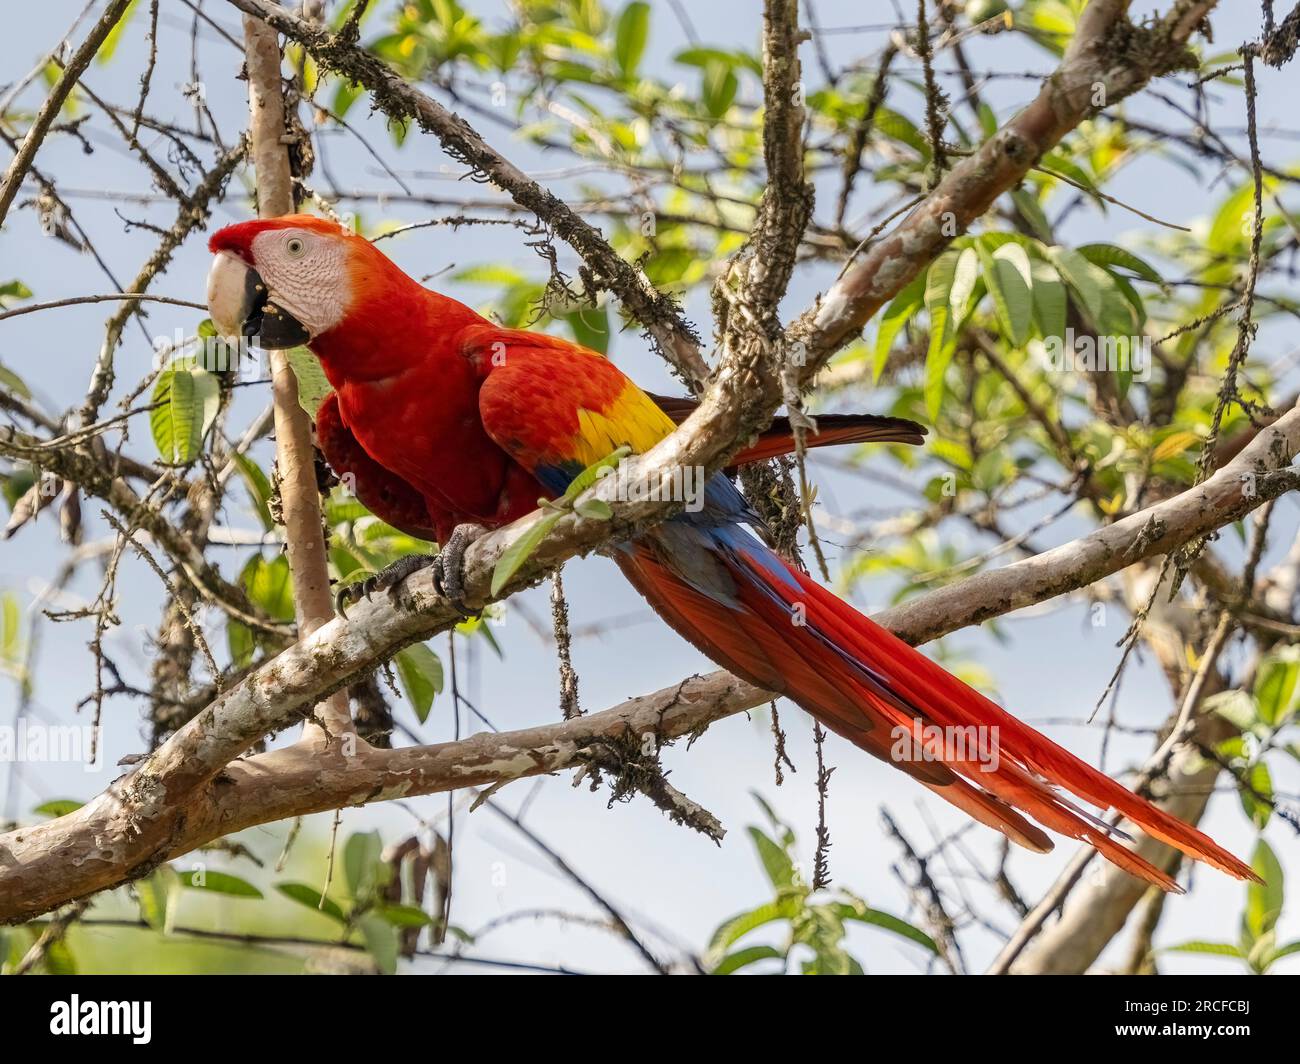 An adult scarlet macaw, Ara macao, perched in a tree at Playa Blanca, Costa Rica. Stock Photo